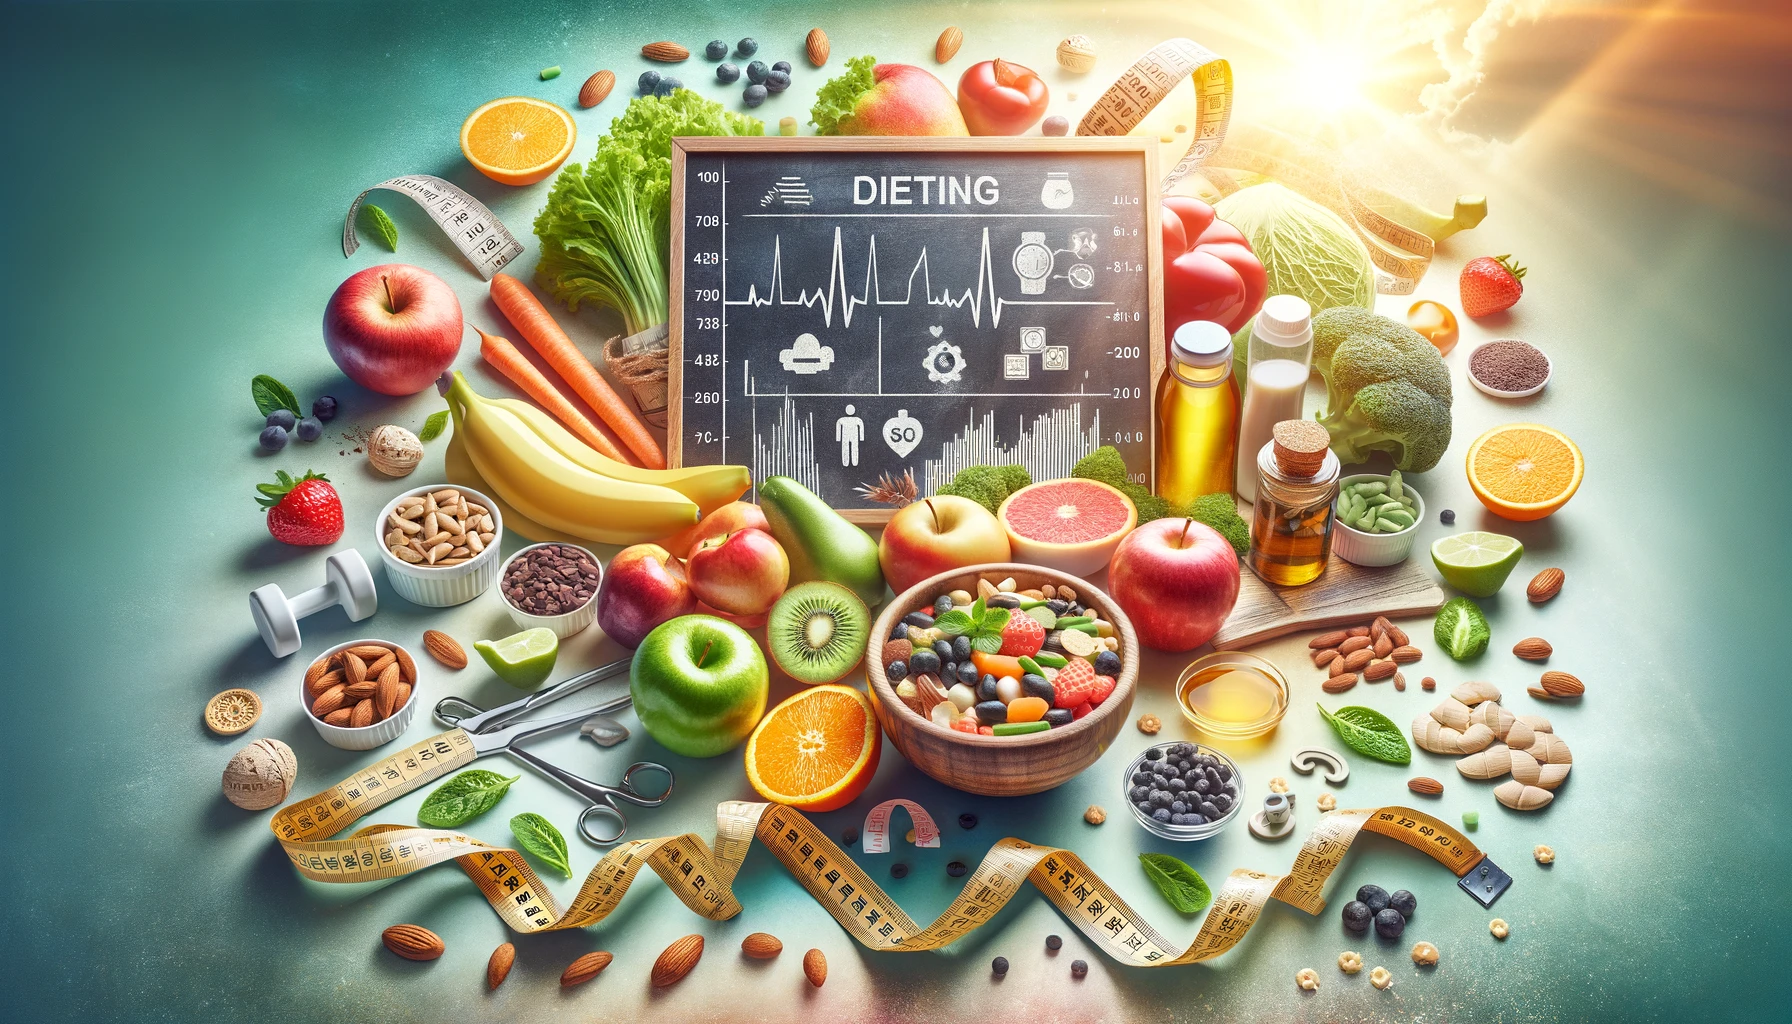 A visually engaging representation of effective dieting concepts, featured on Healthy Life - New Start blog.